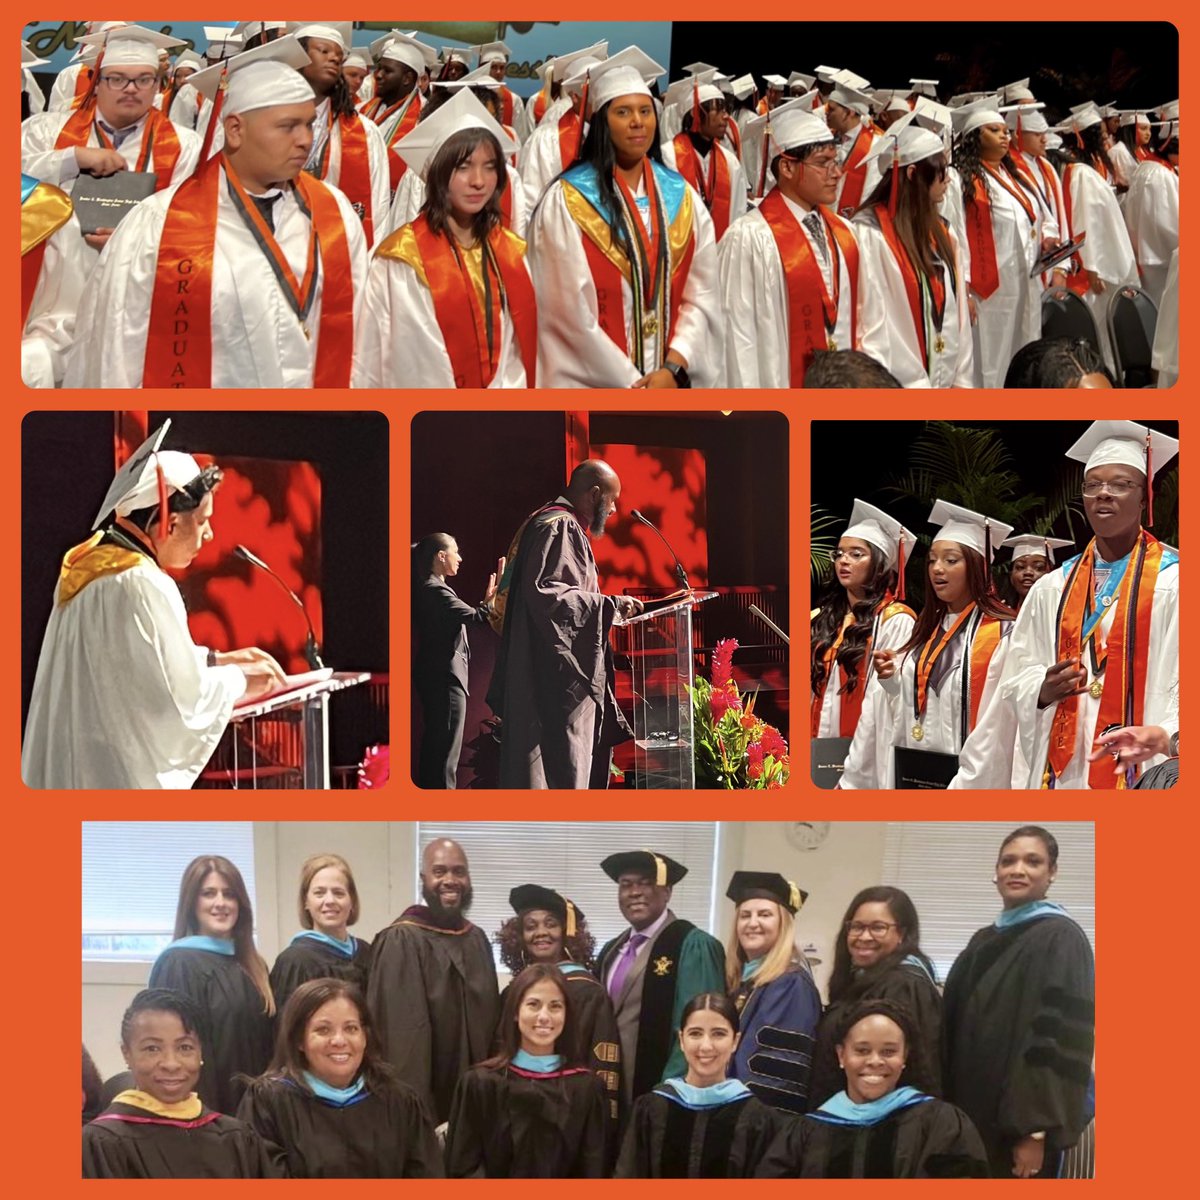 Tornadoes on the horizon: breaking down any and all obstacles in their path. Each member of this graduating class from The Historic Booker T. Washington SHS comes armed with the heart of a champion! @BTW_SHS @SuptDotres @MDCPS @MjLewis13 #Classof2023